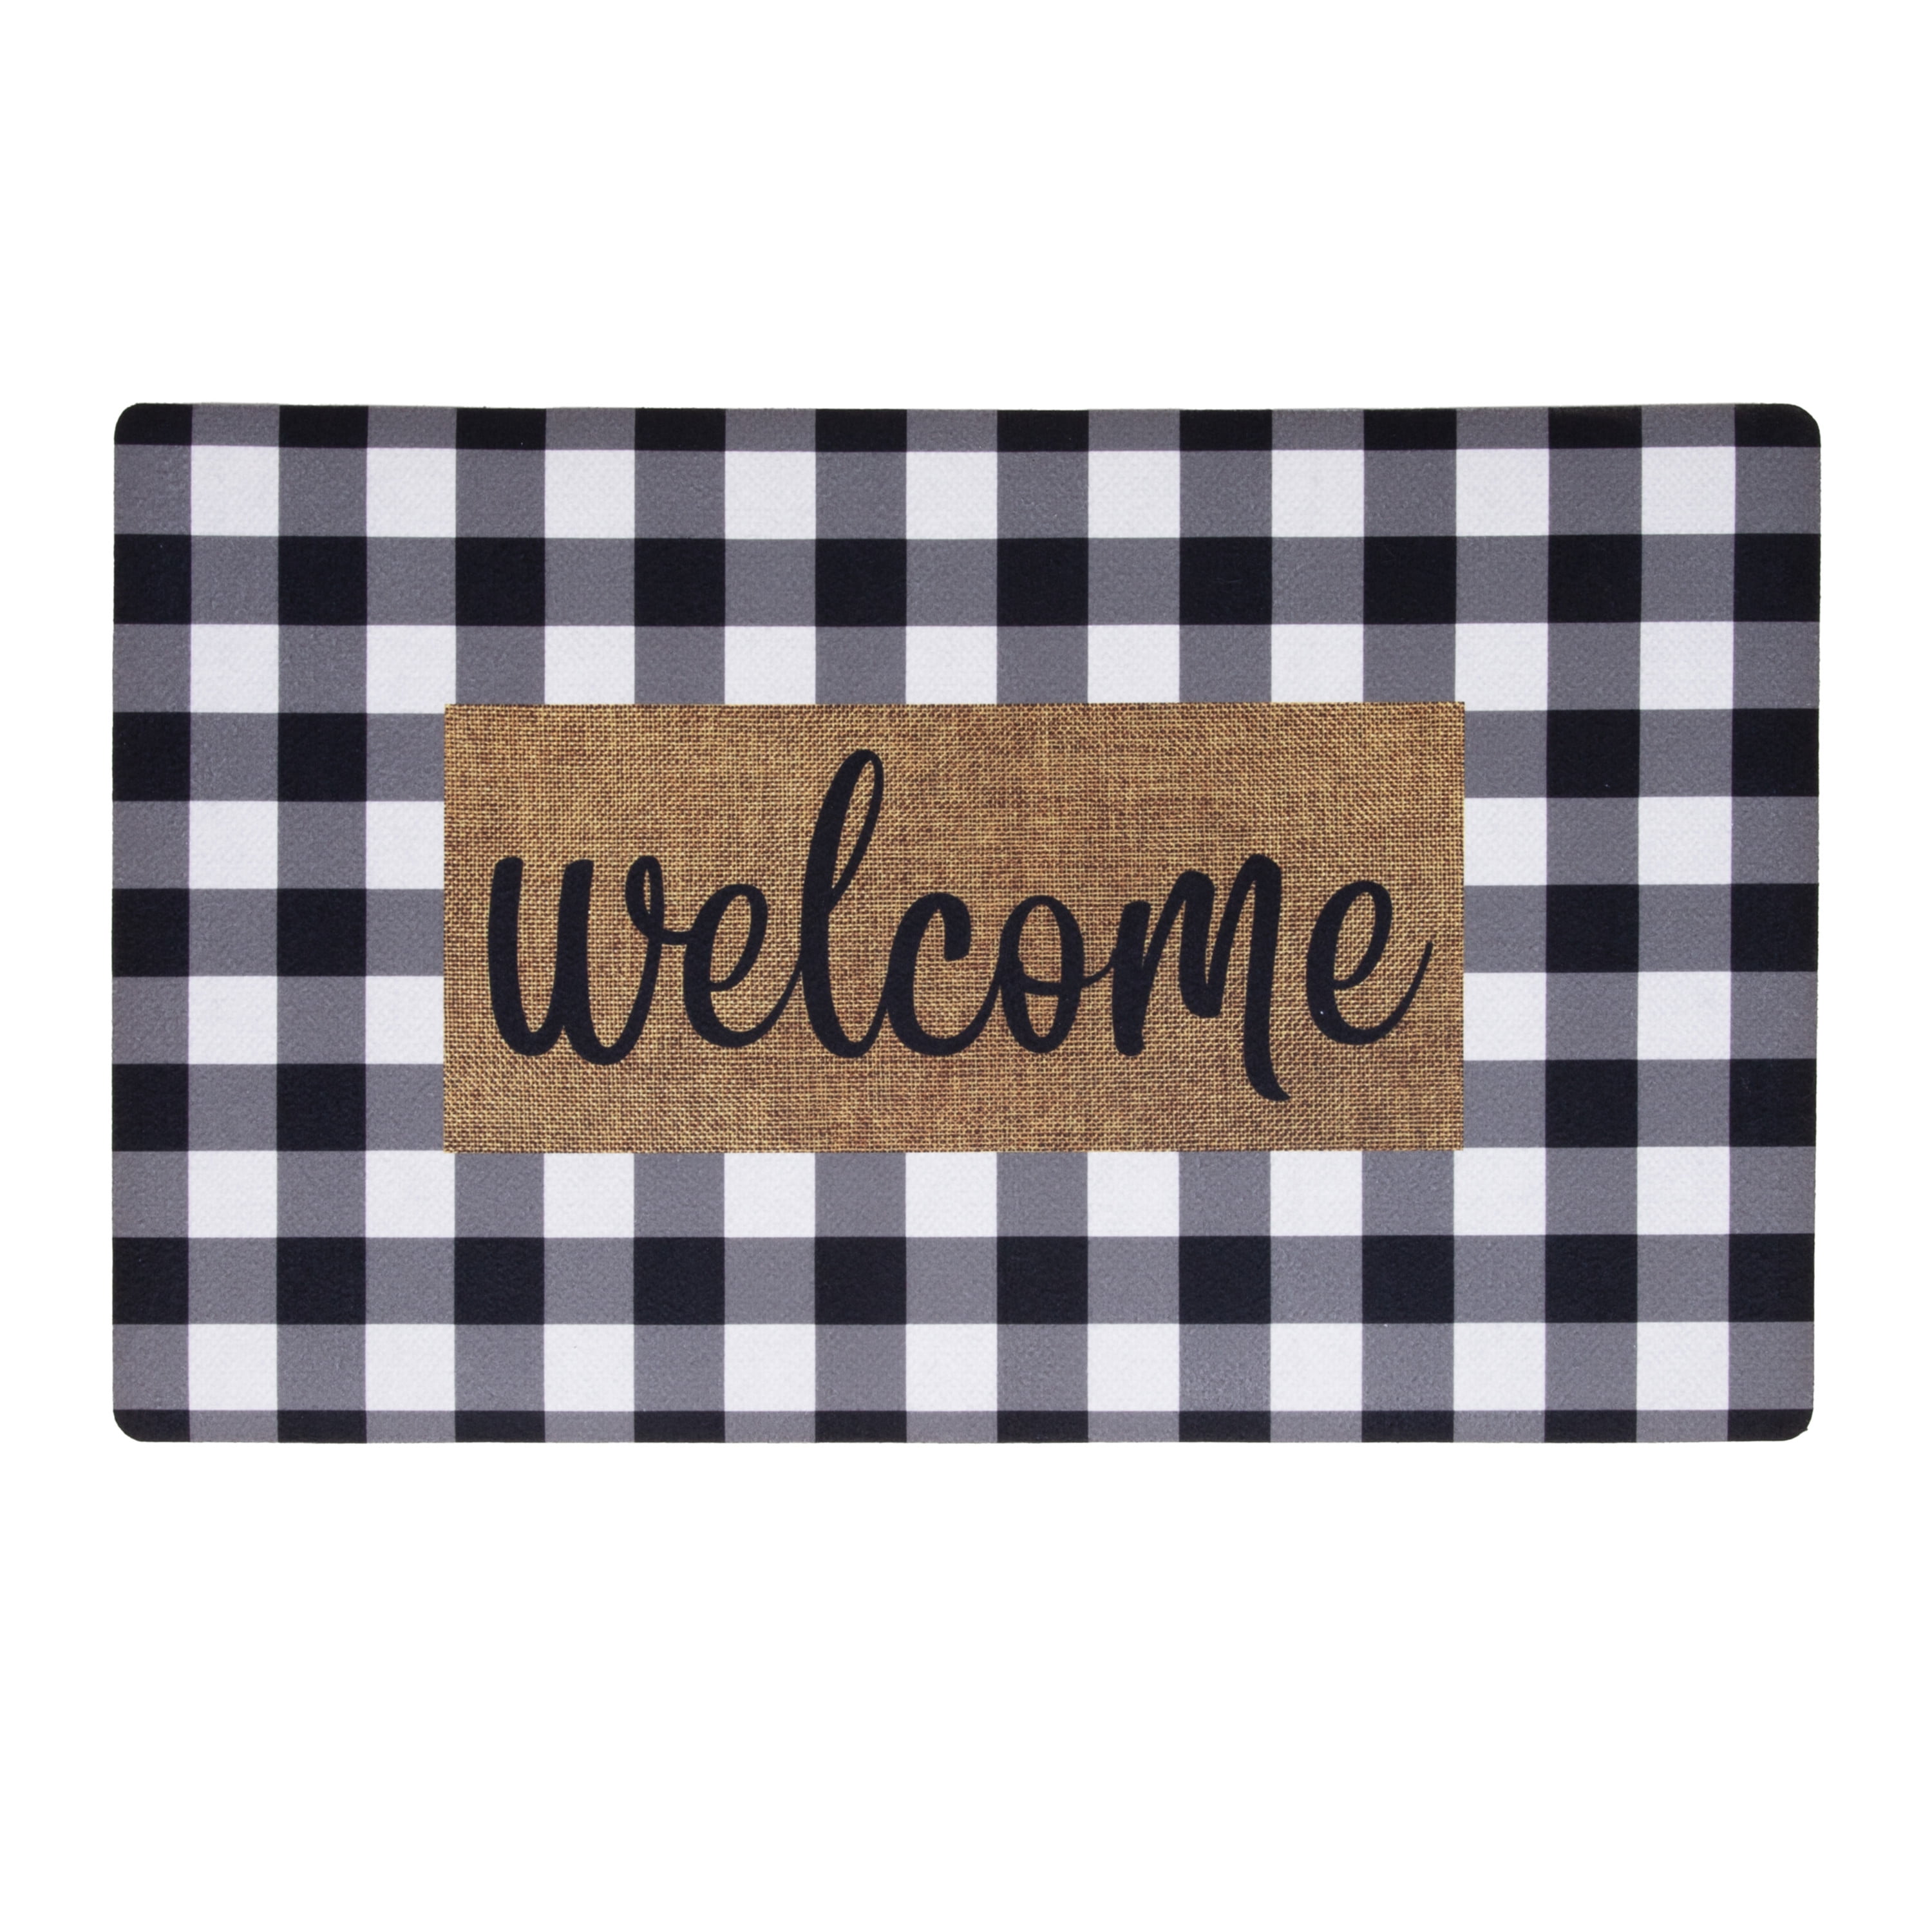 Mud Scrubbing Entrance Doormat Throw with Scrapers Brown Non Tracking 24 x 36 Mind Reader Ultimate Greeting Mat